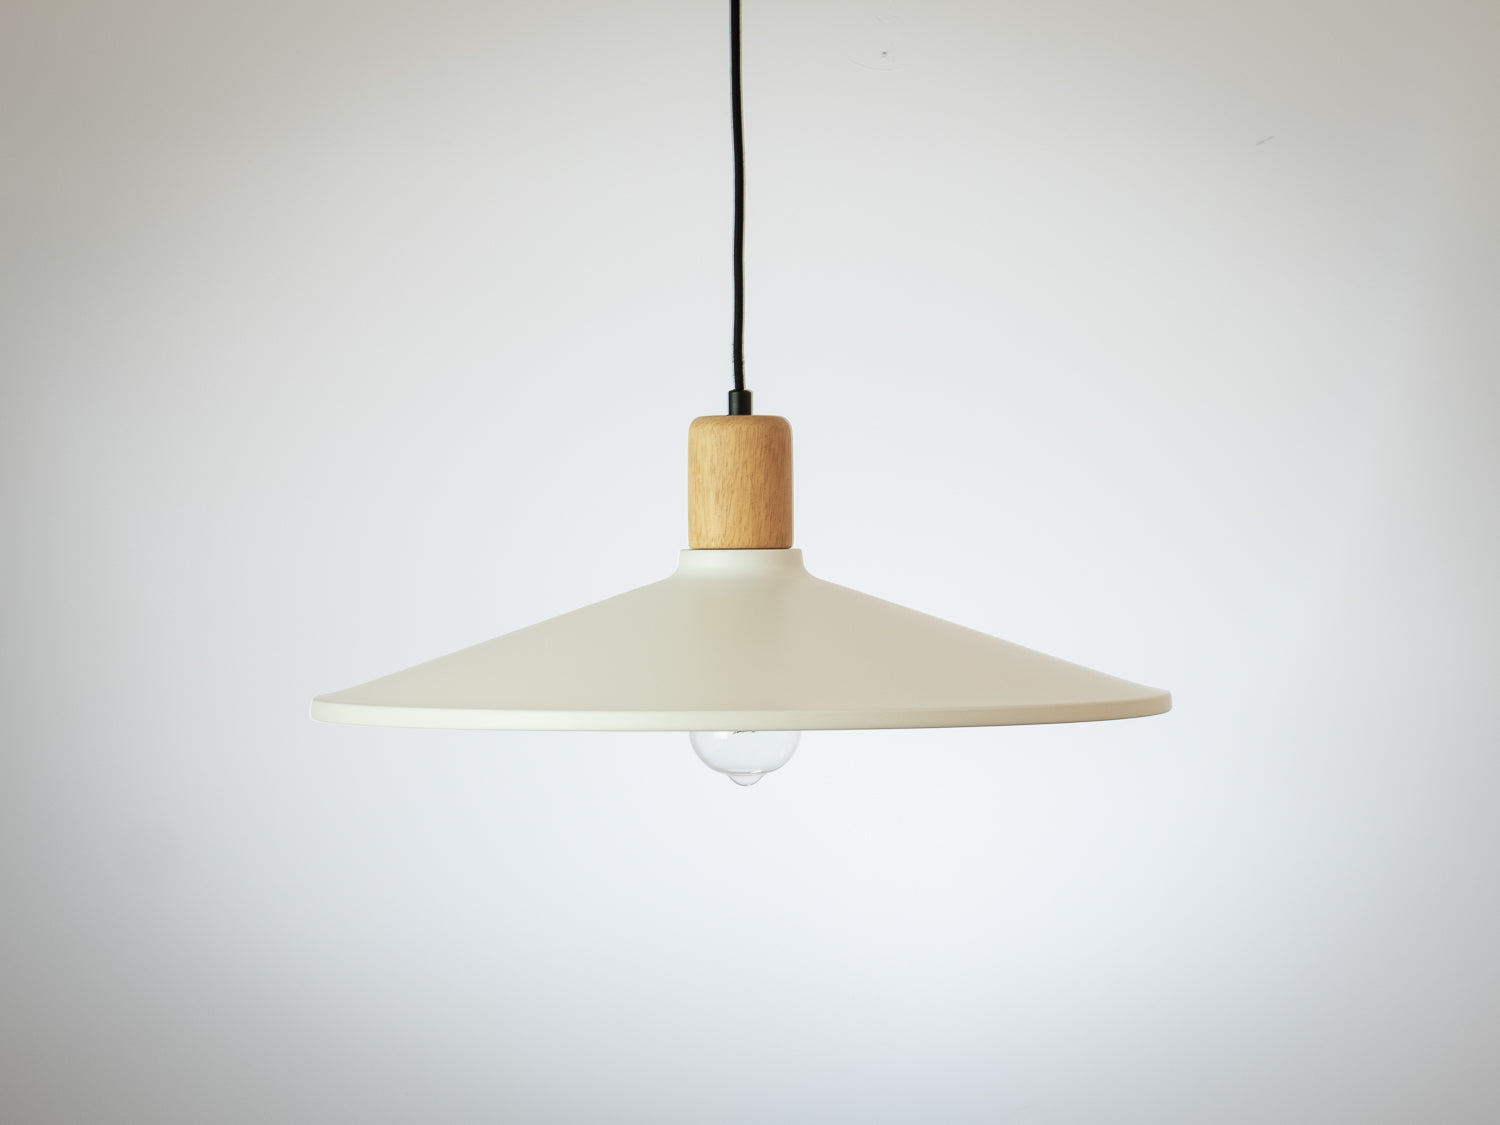 48cm Metal Pendant with Wooden Lamp Holder - img605aa15eac343